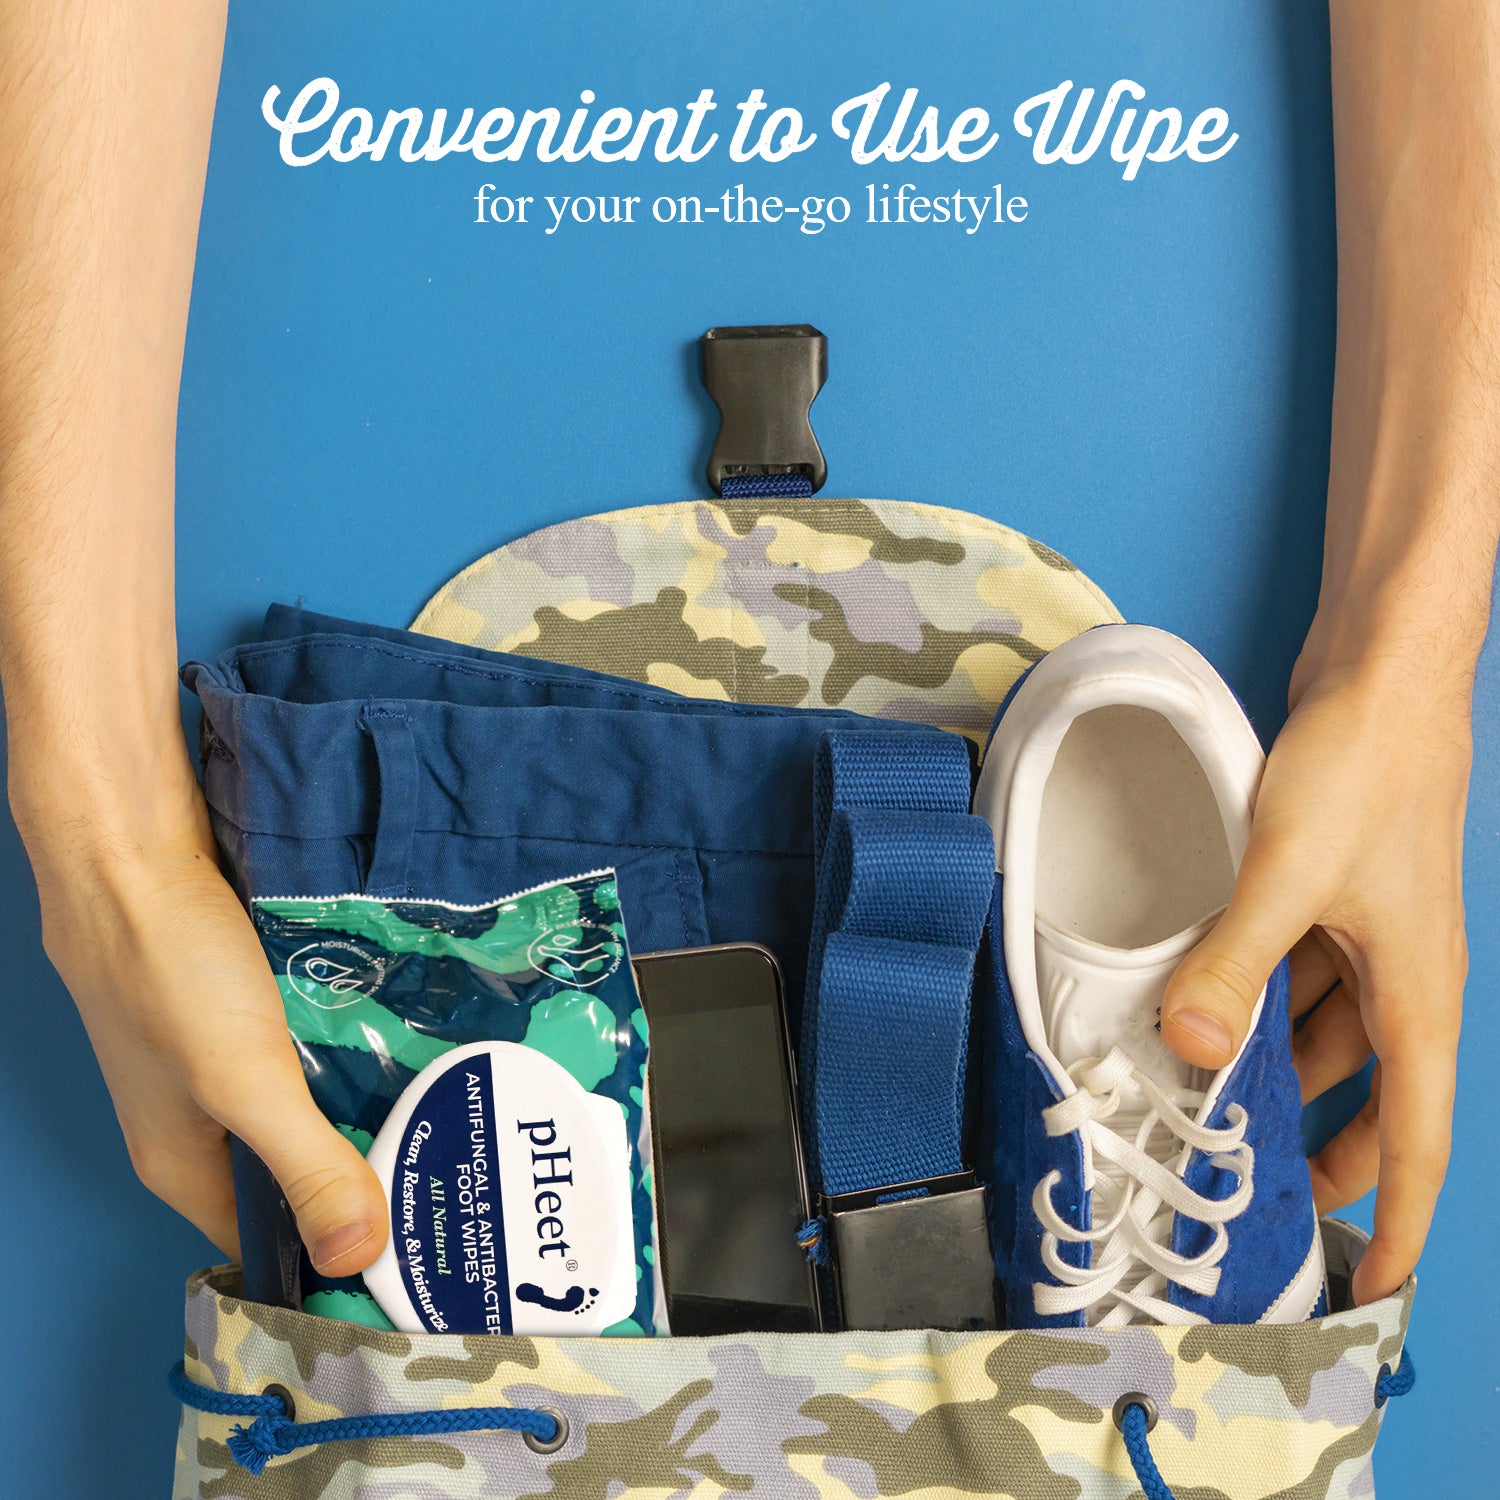 Convenient to use wipe for your on-the-go lifestyle.